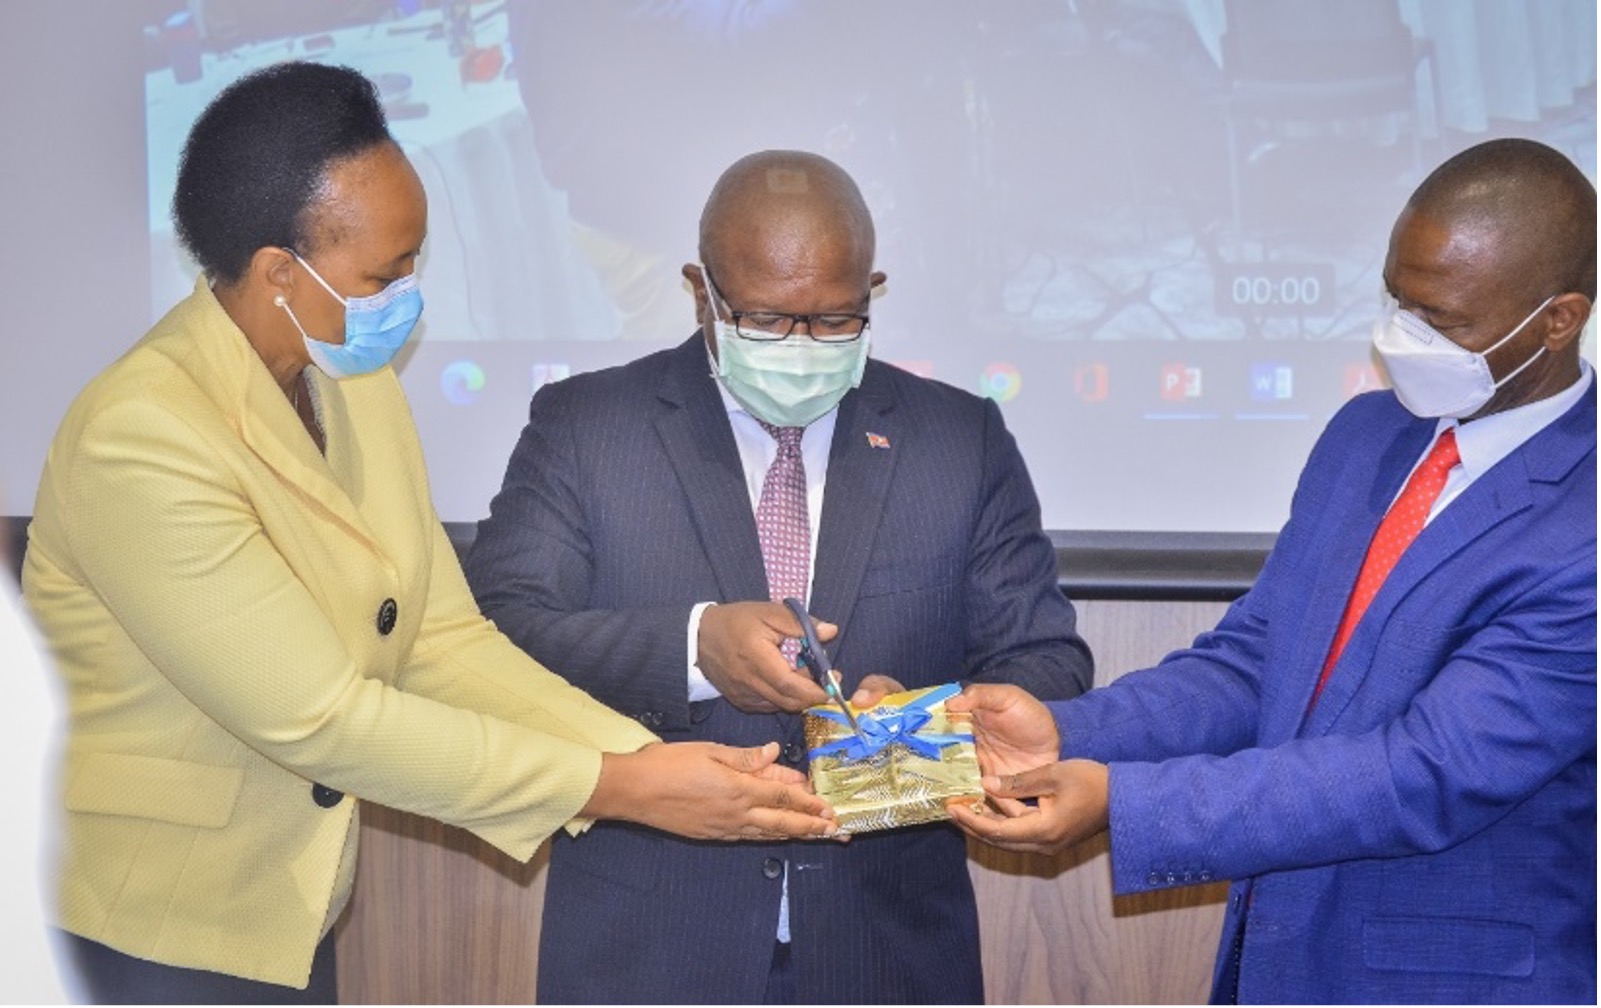 Official Launch of the Eswatini National Pharmacovigilance Policy and Implementation Framework by the Honourable Minister of Commerce Industry and Trade, Manqoba Khumalo (centre), Principal Secretary Dr Simon Zwane  (right), and Deputy Director Pharmaceutical Services, Fortunate Bhembe (left).